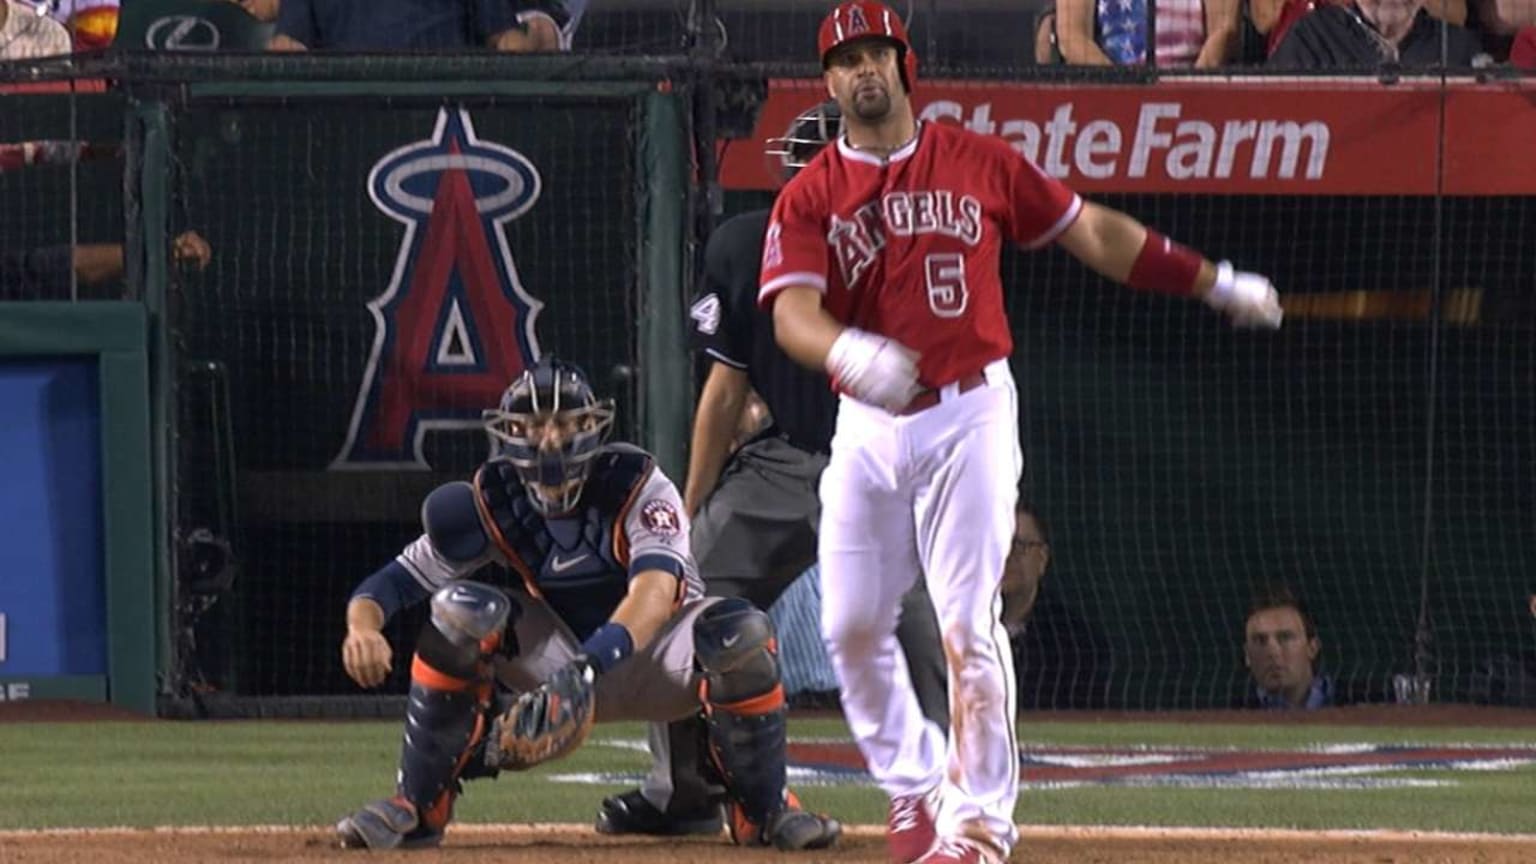 Angels shut out Mariners on night Albert Pujols gets 3,000th hit